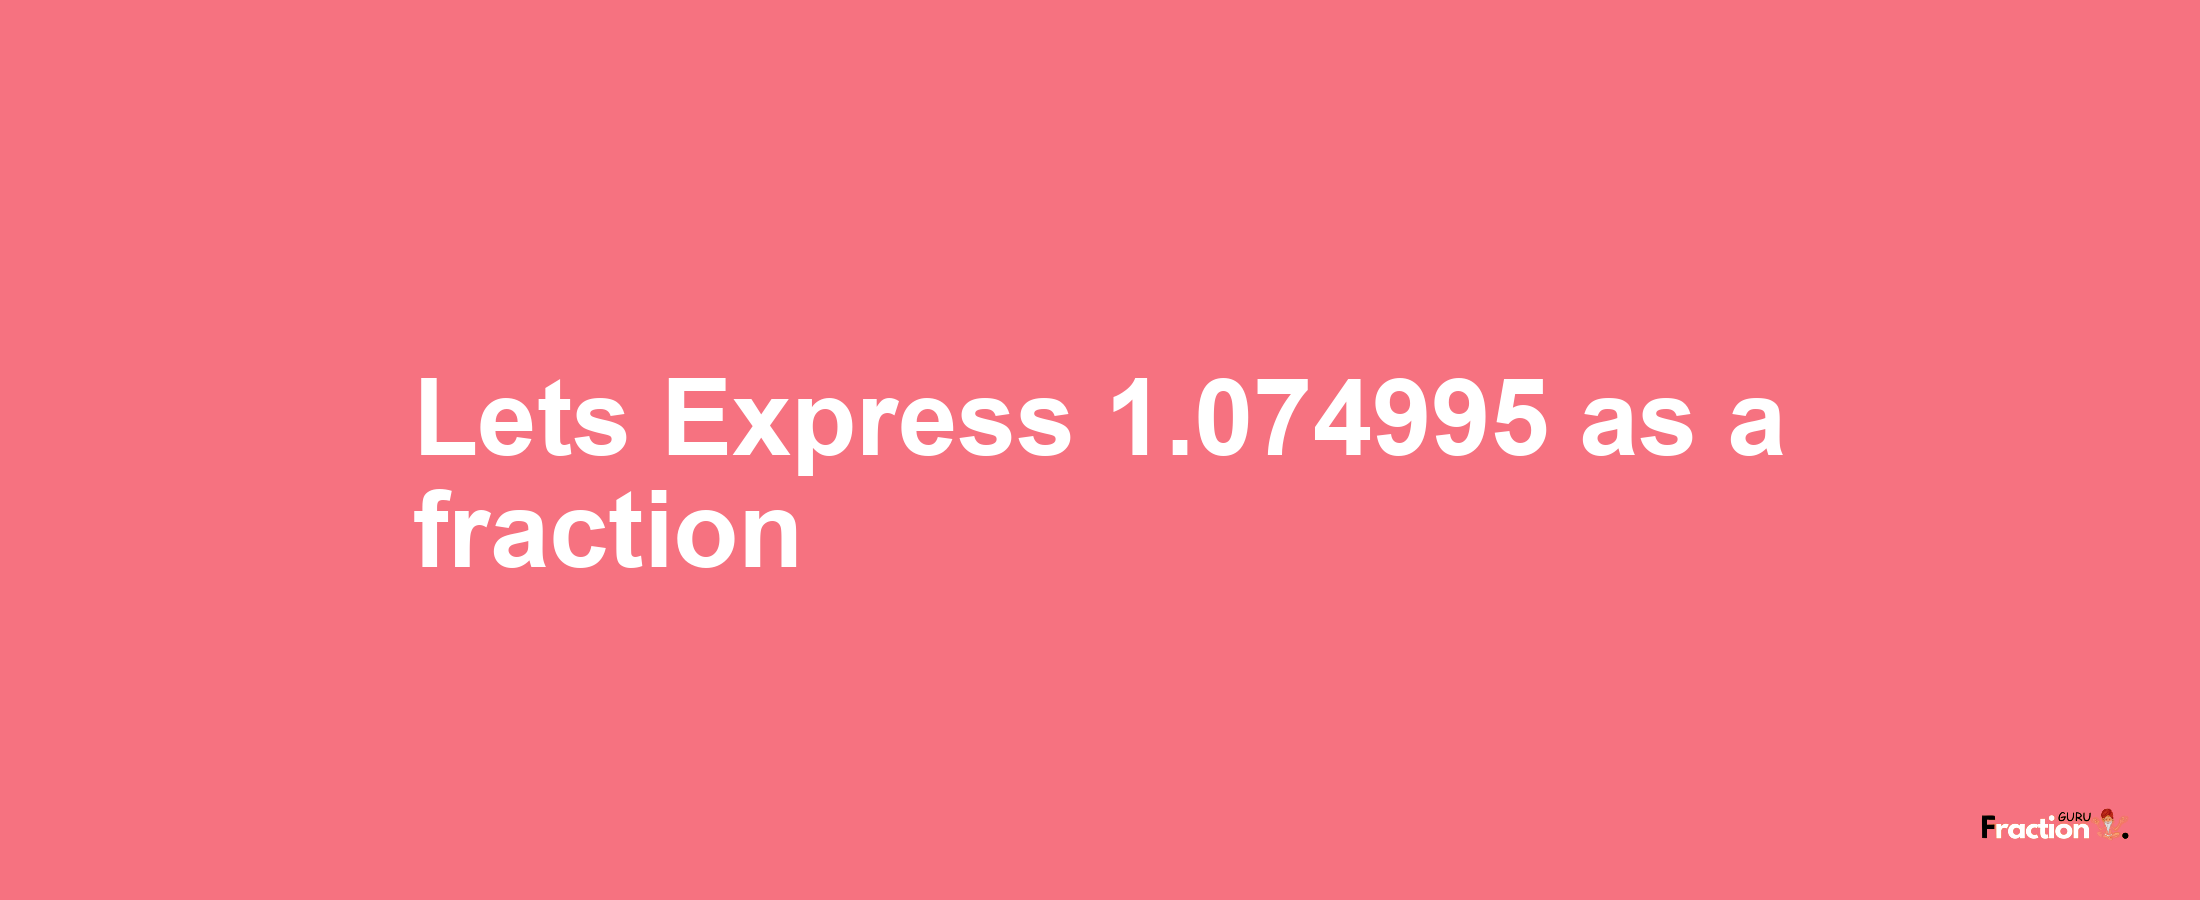 Lets Express 1.074995 as afraction